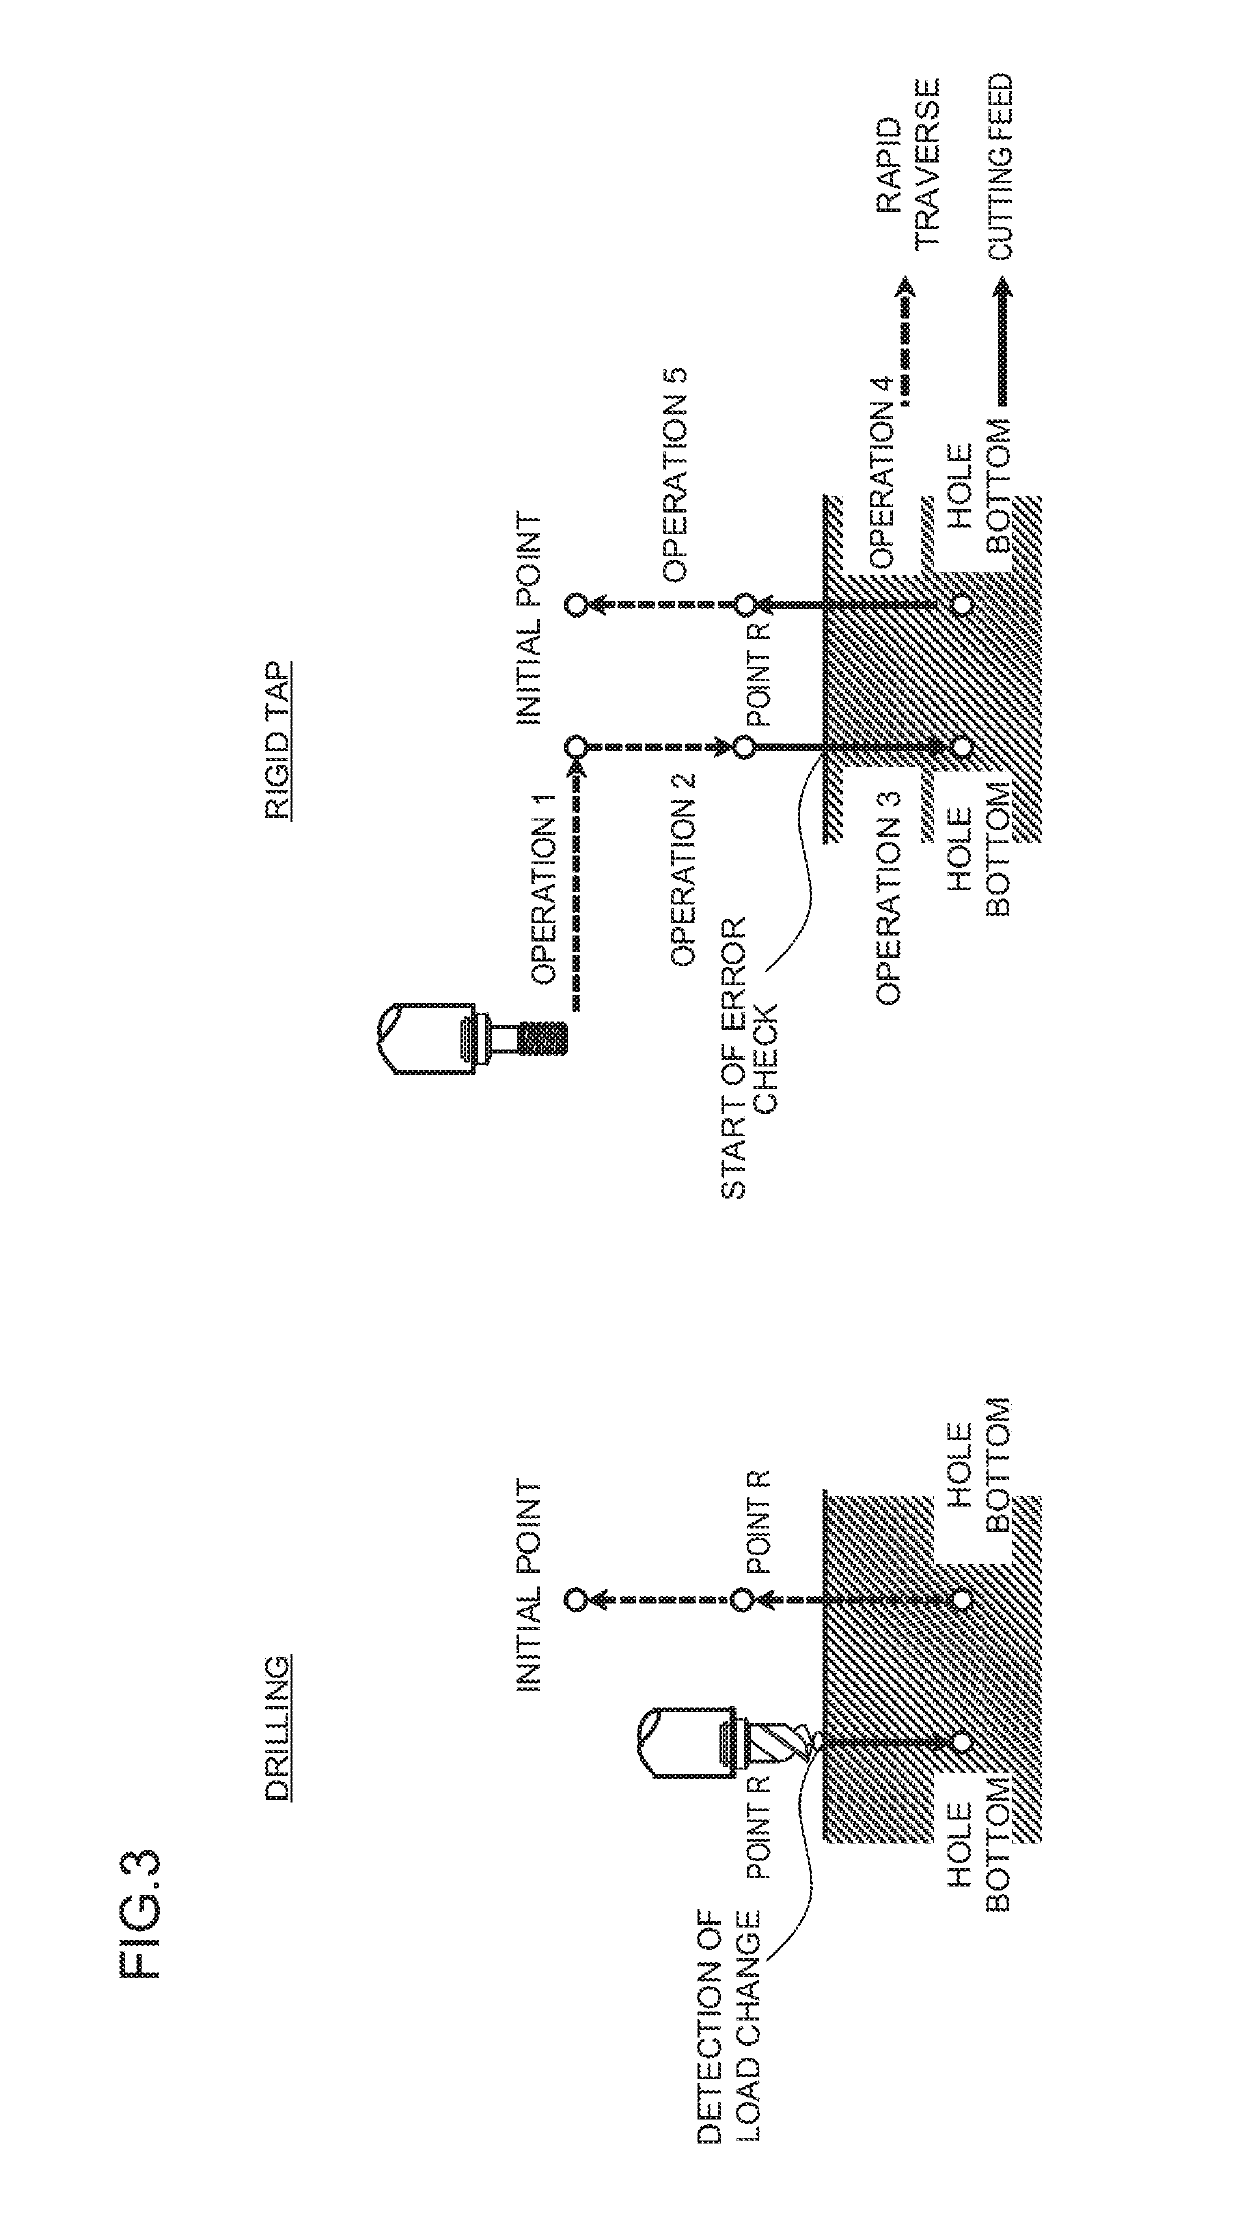 Numerical controller for controlling tapping